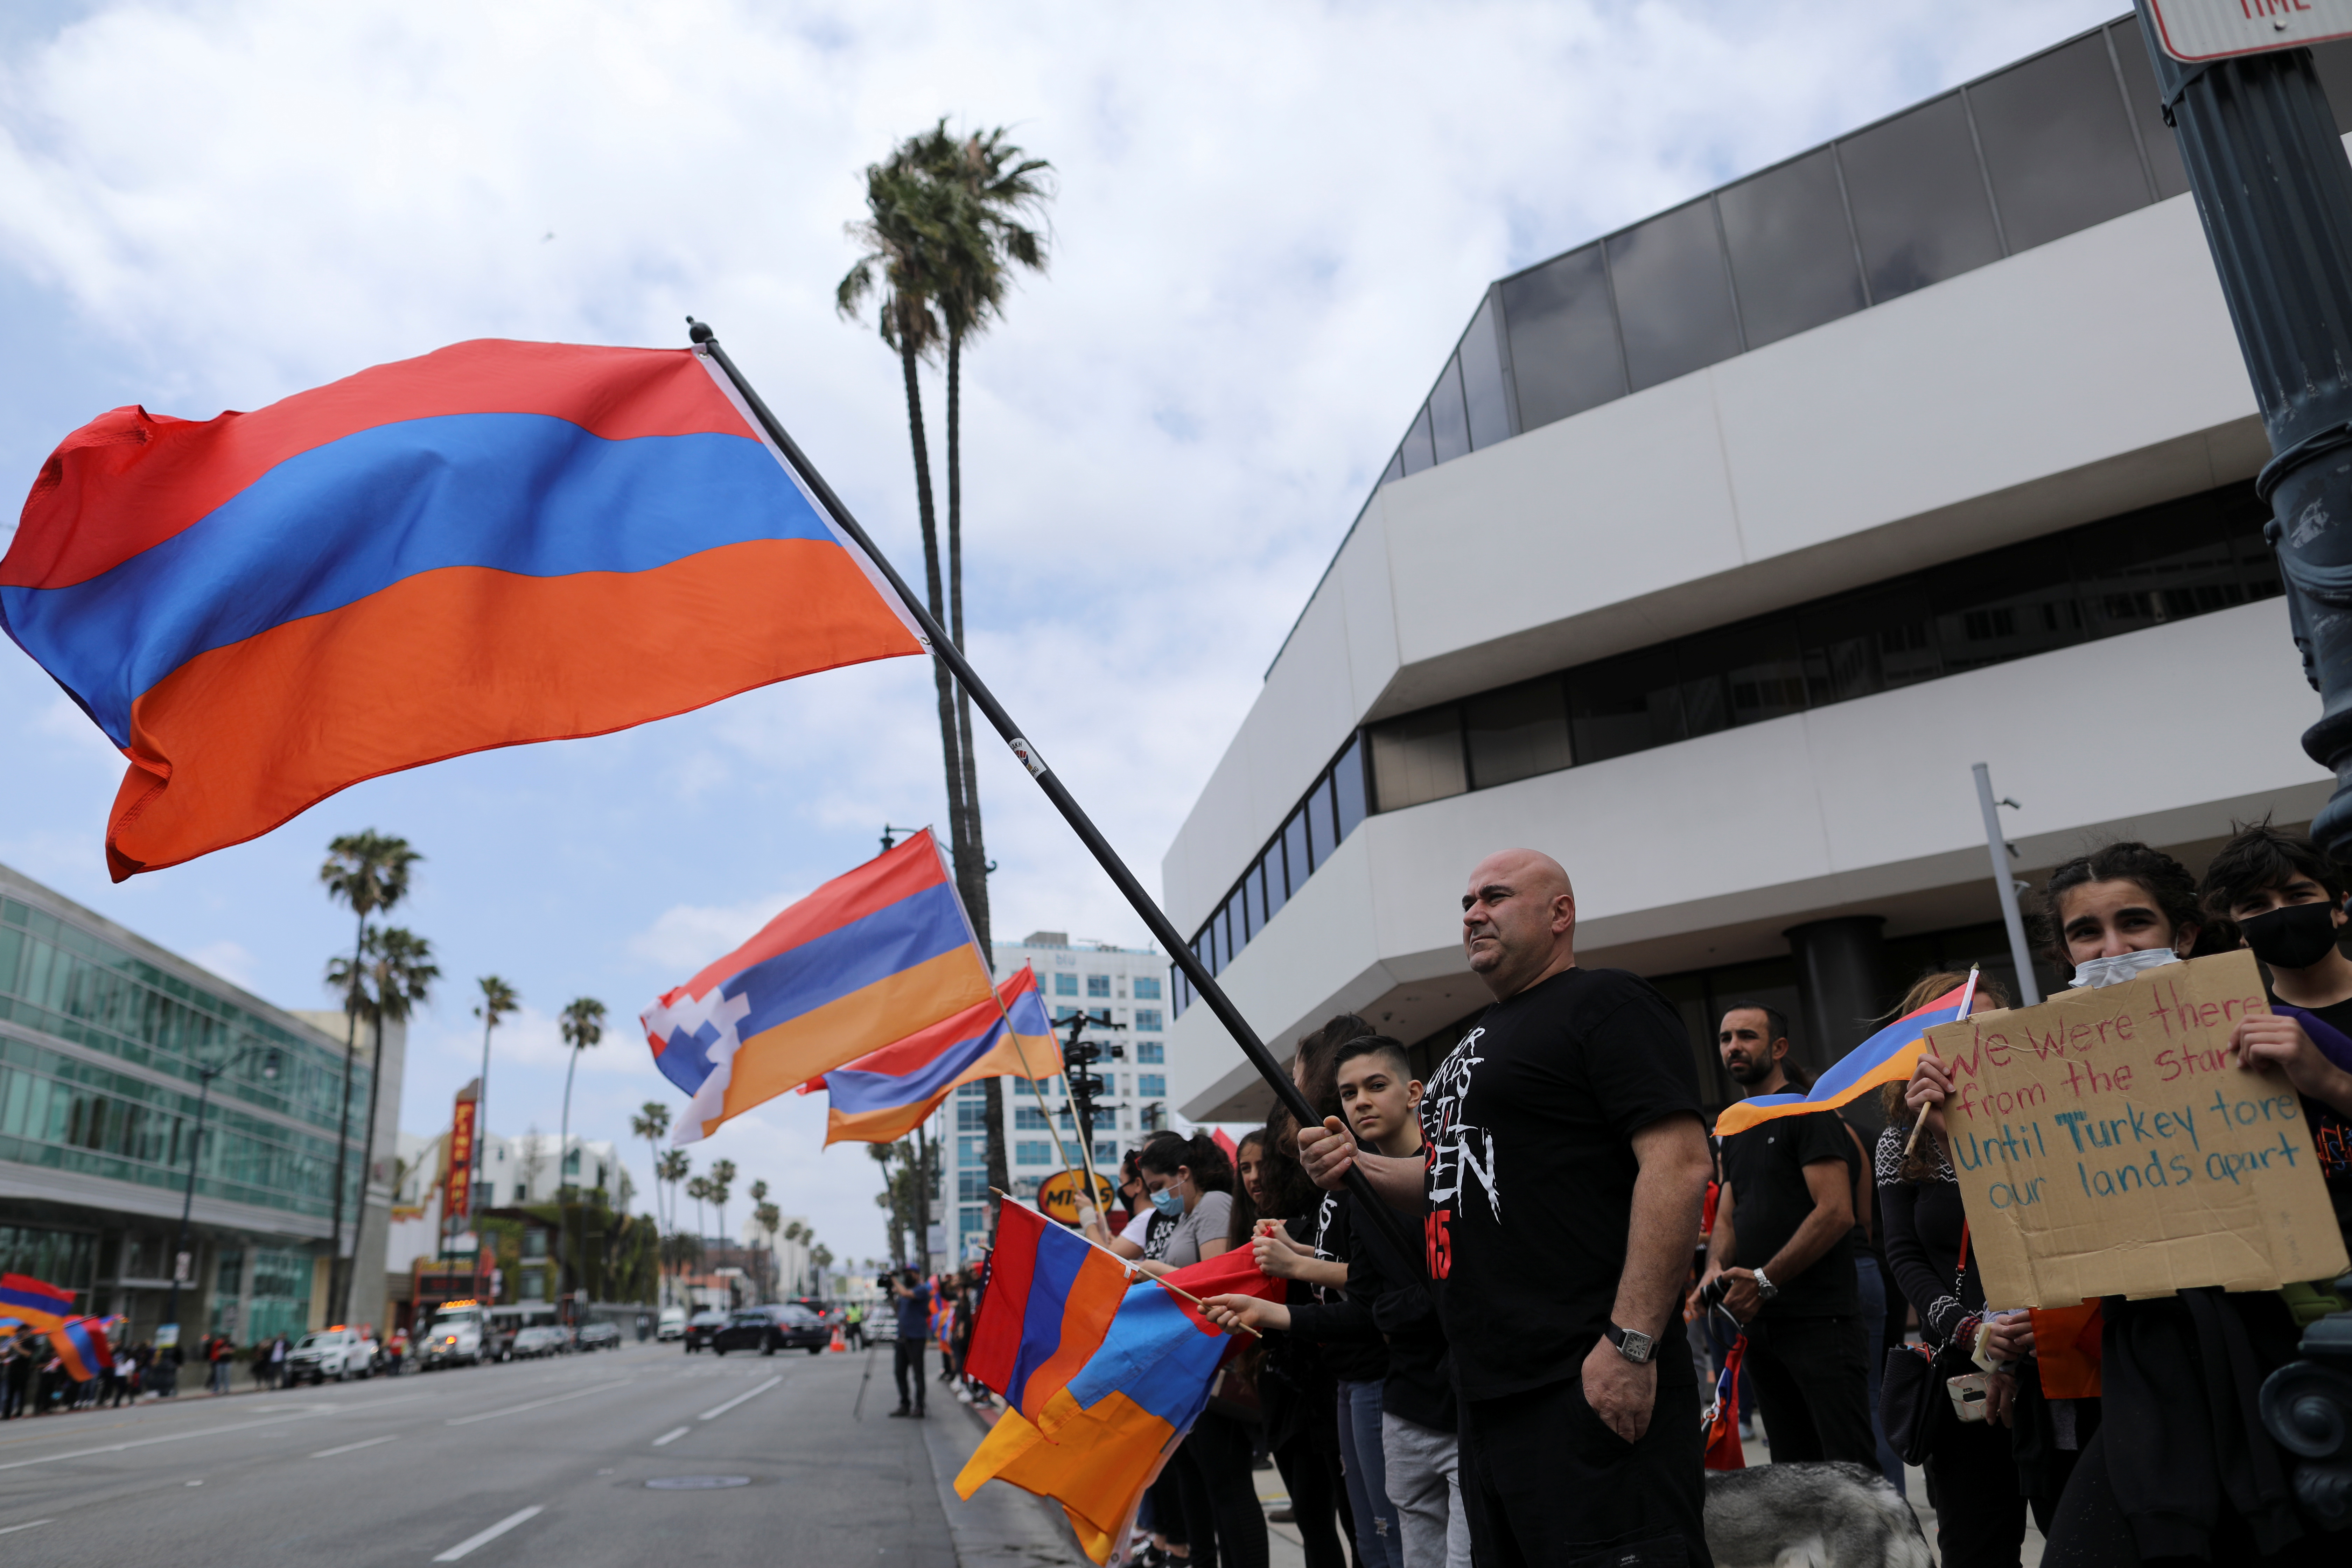 Members of the Armenian diaspora in the U.S. rally to mark the anniversary of the 1915 genocide, in Los Angeles